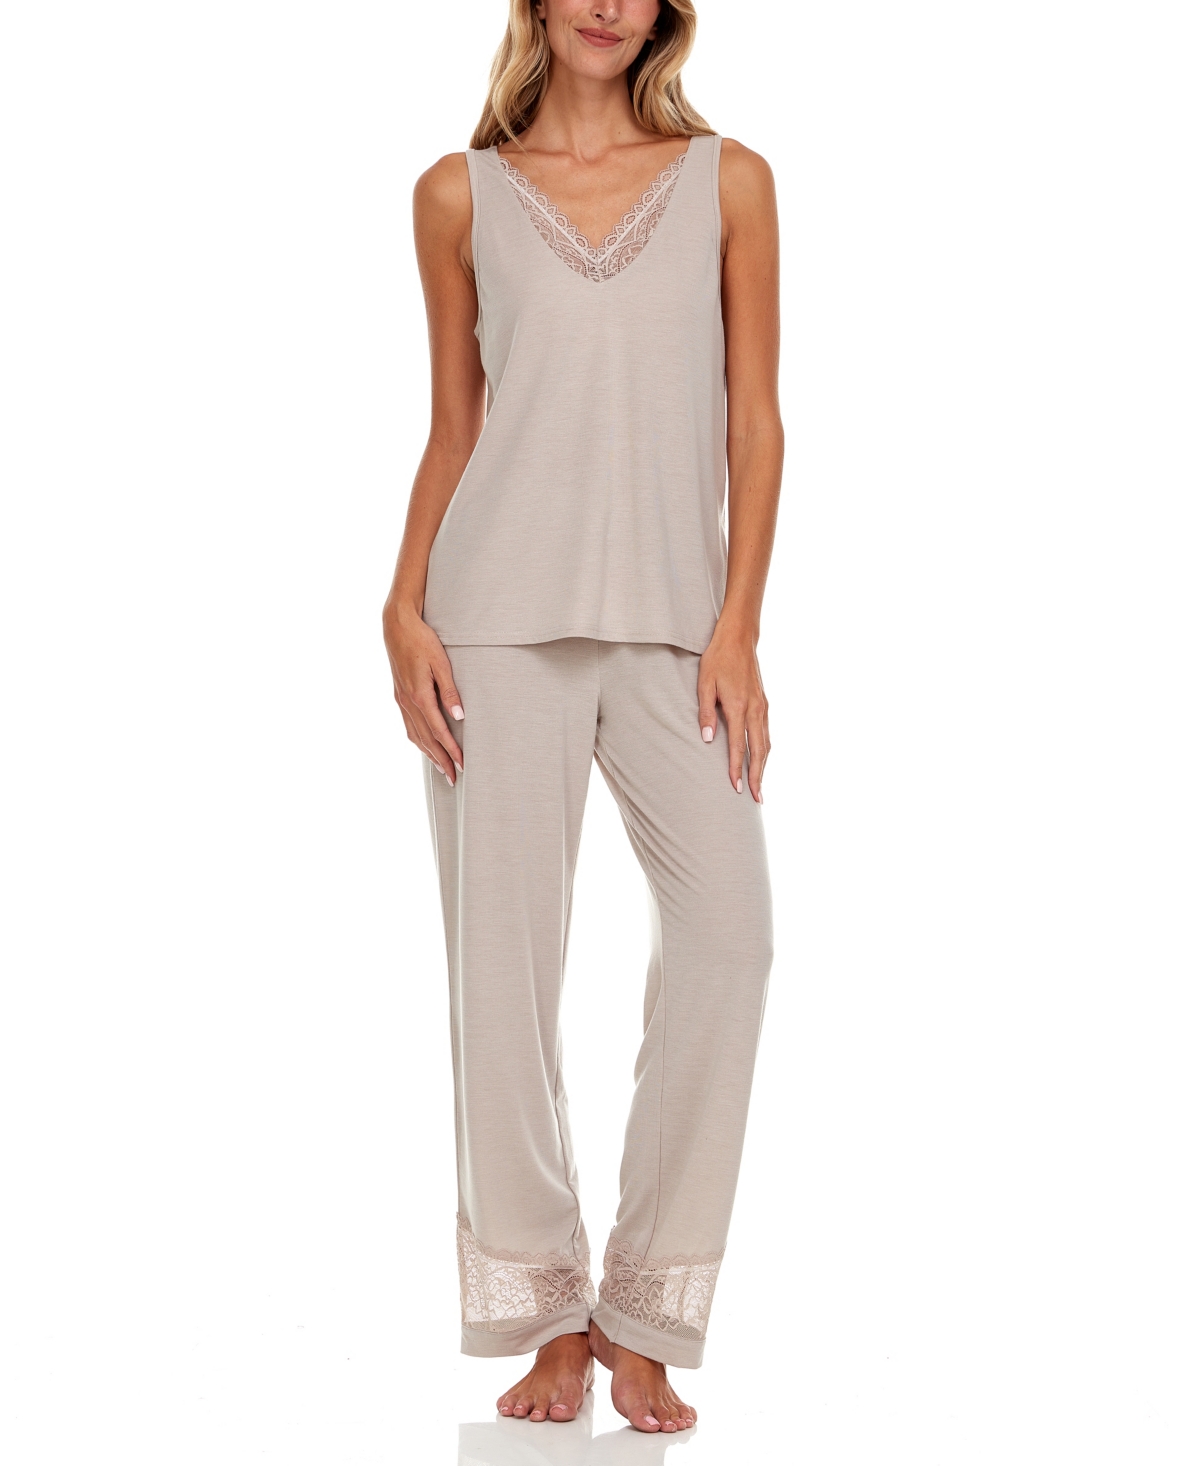 Flora By Flora Nikrooz Women's Franny Tank And Pajama Pants Set In Beige